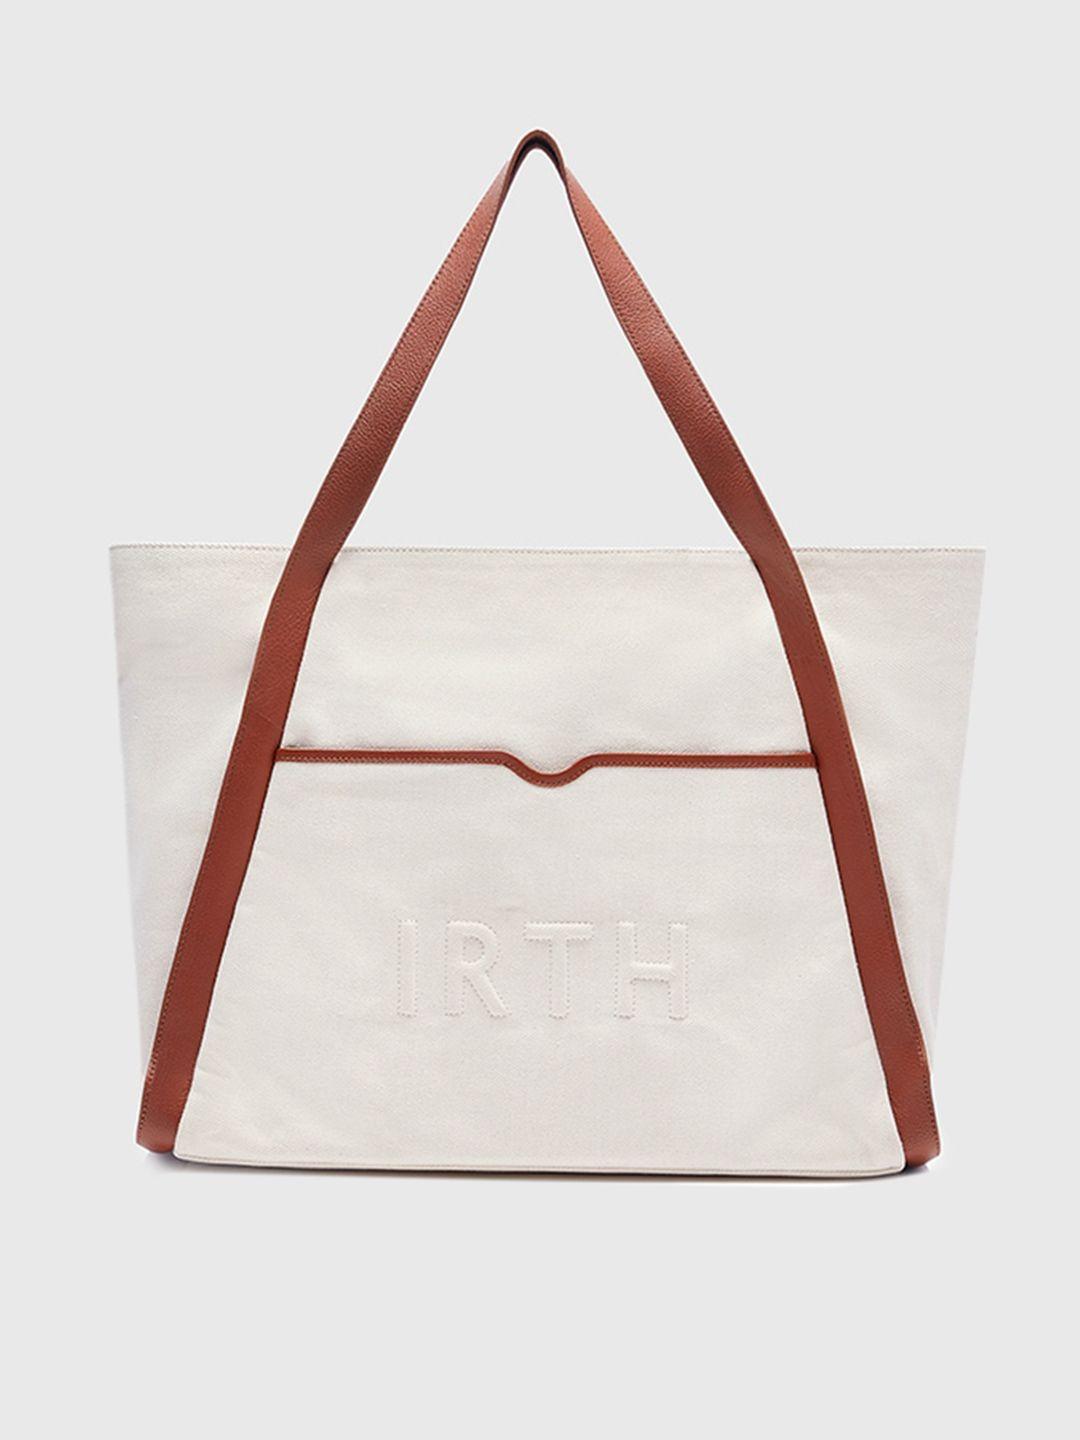 irth textured oversized structured tote bag